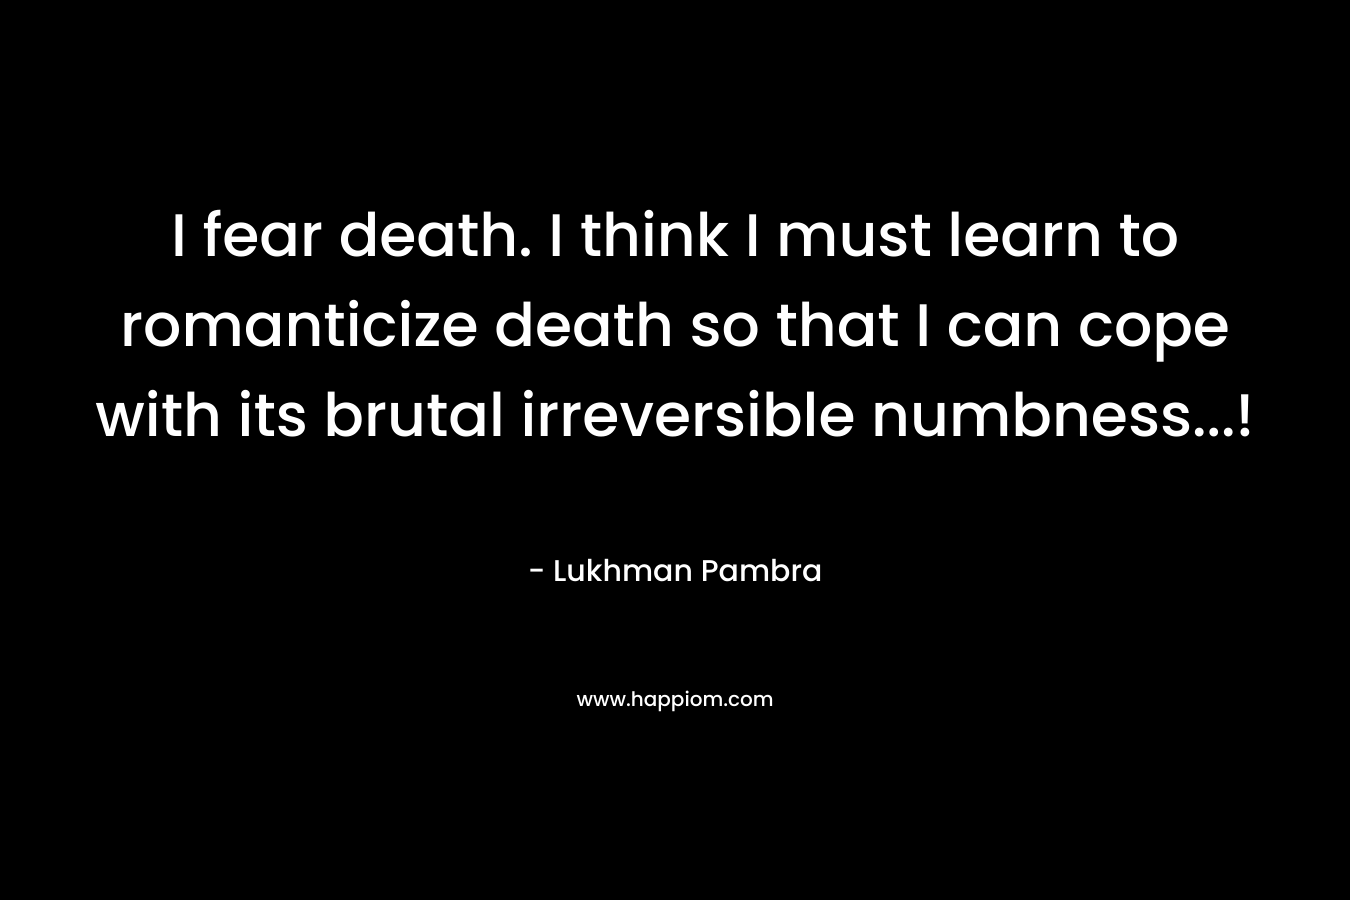 I fear death. I think I must learn to romanticize death so that I can cope with its brutal irreversible numbness...!